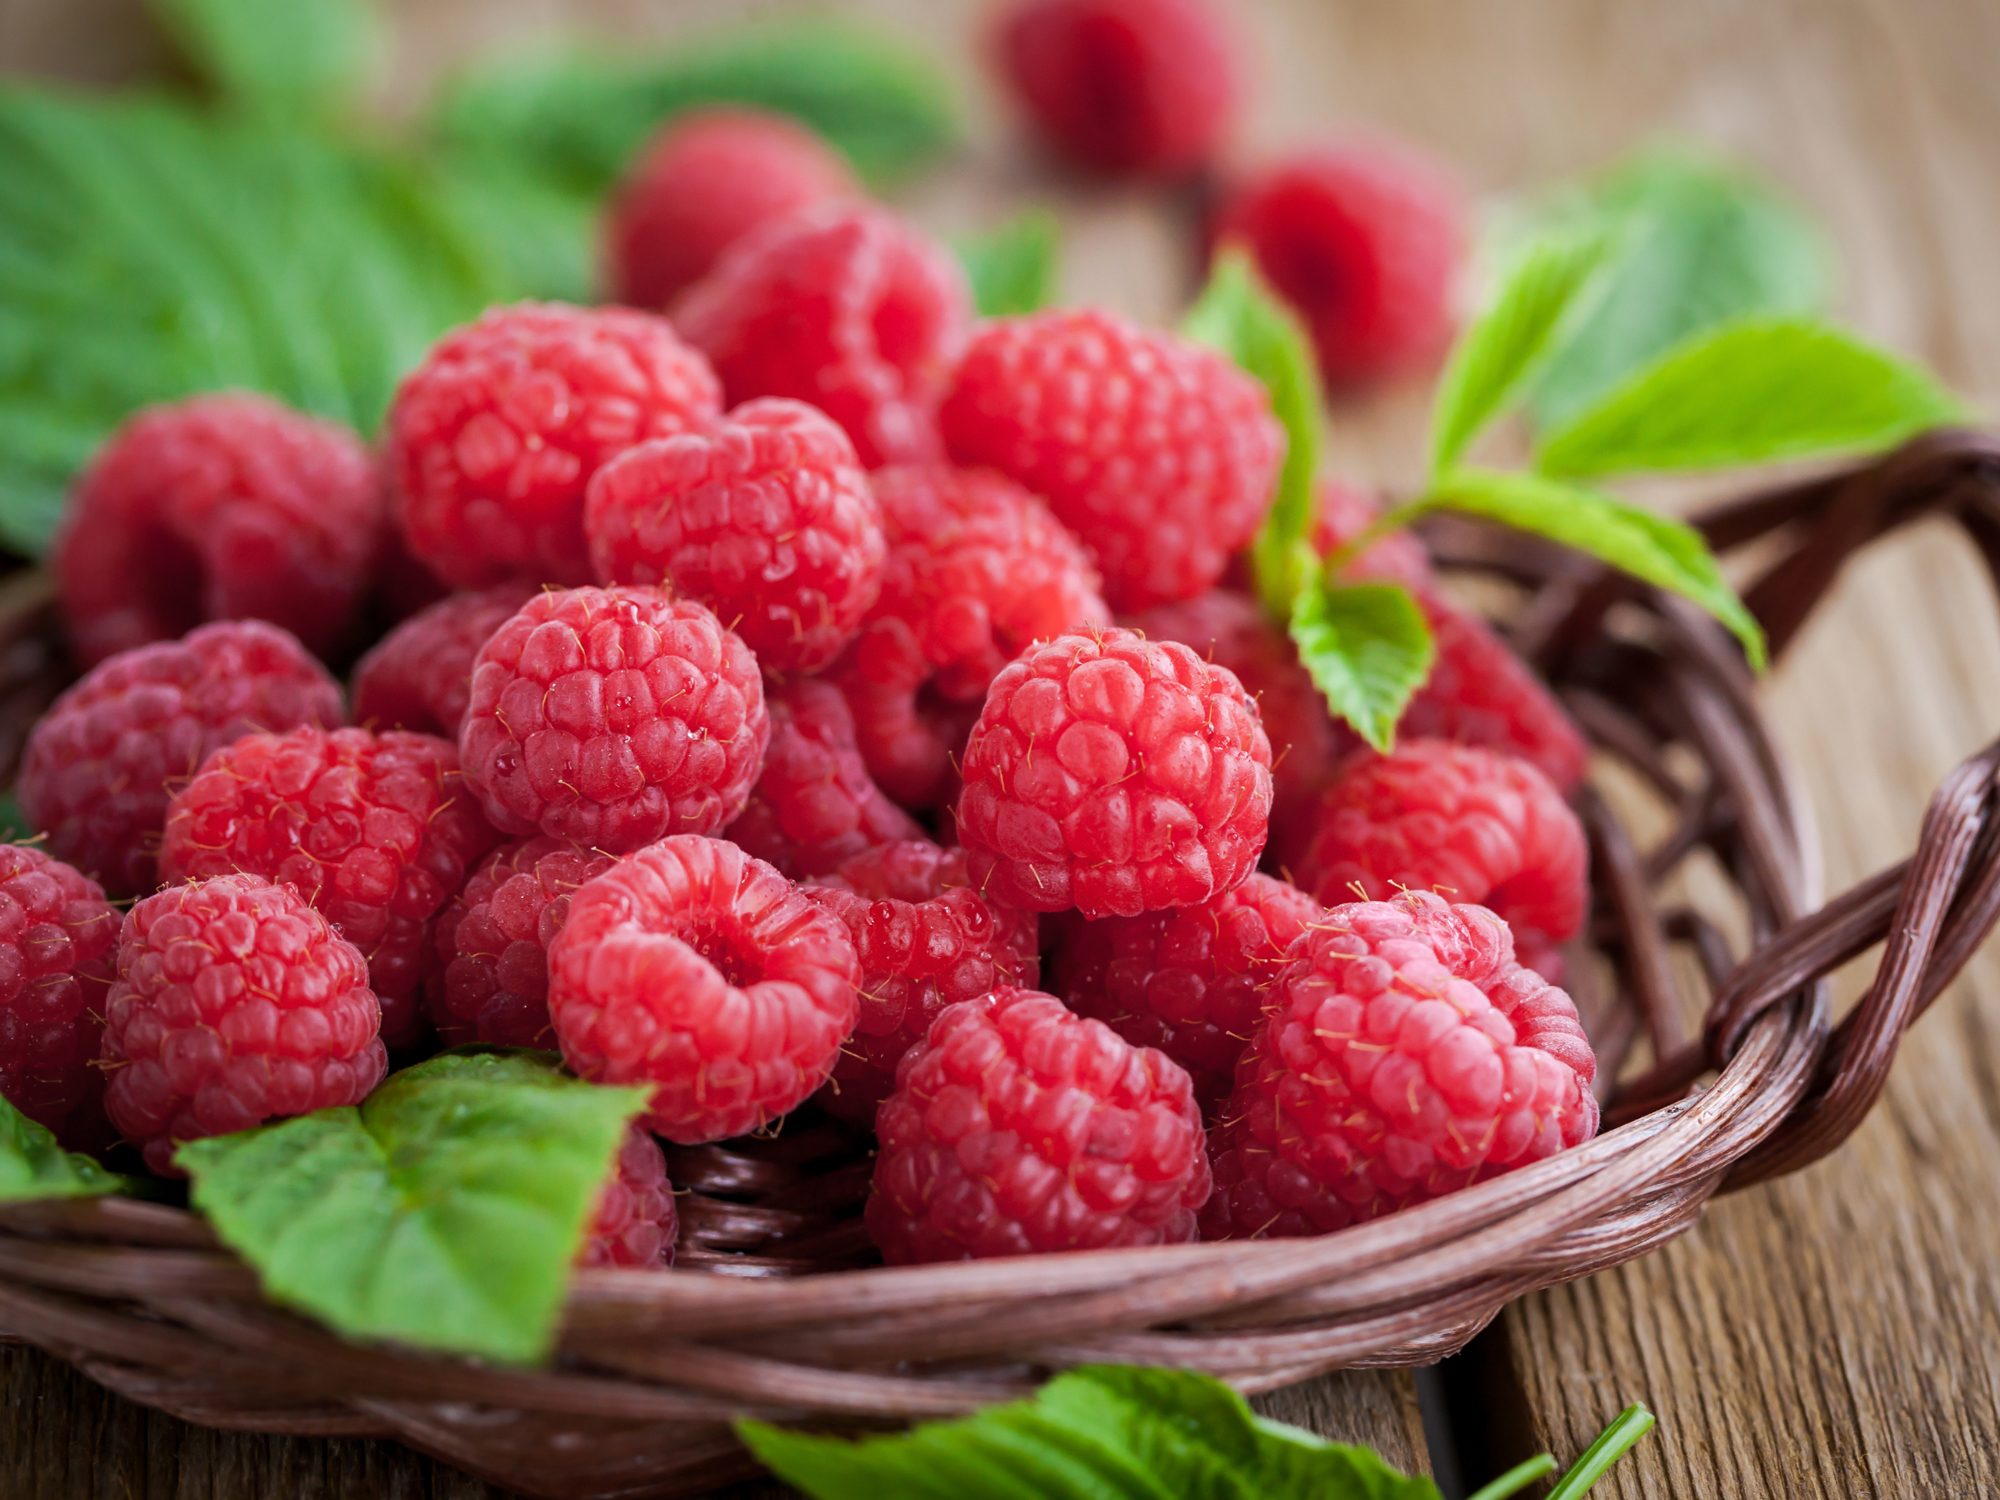 Raspberry: A cancer-fighting, fat-busting, anti-aging berry